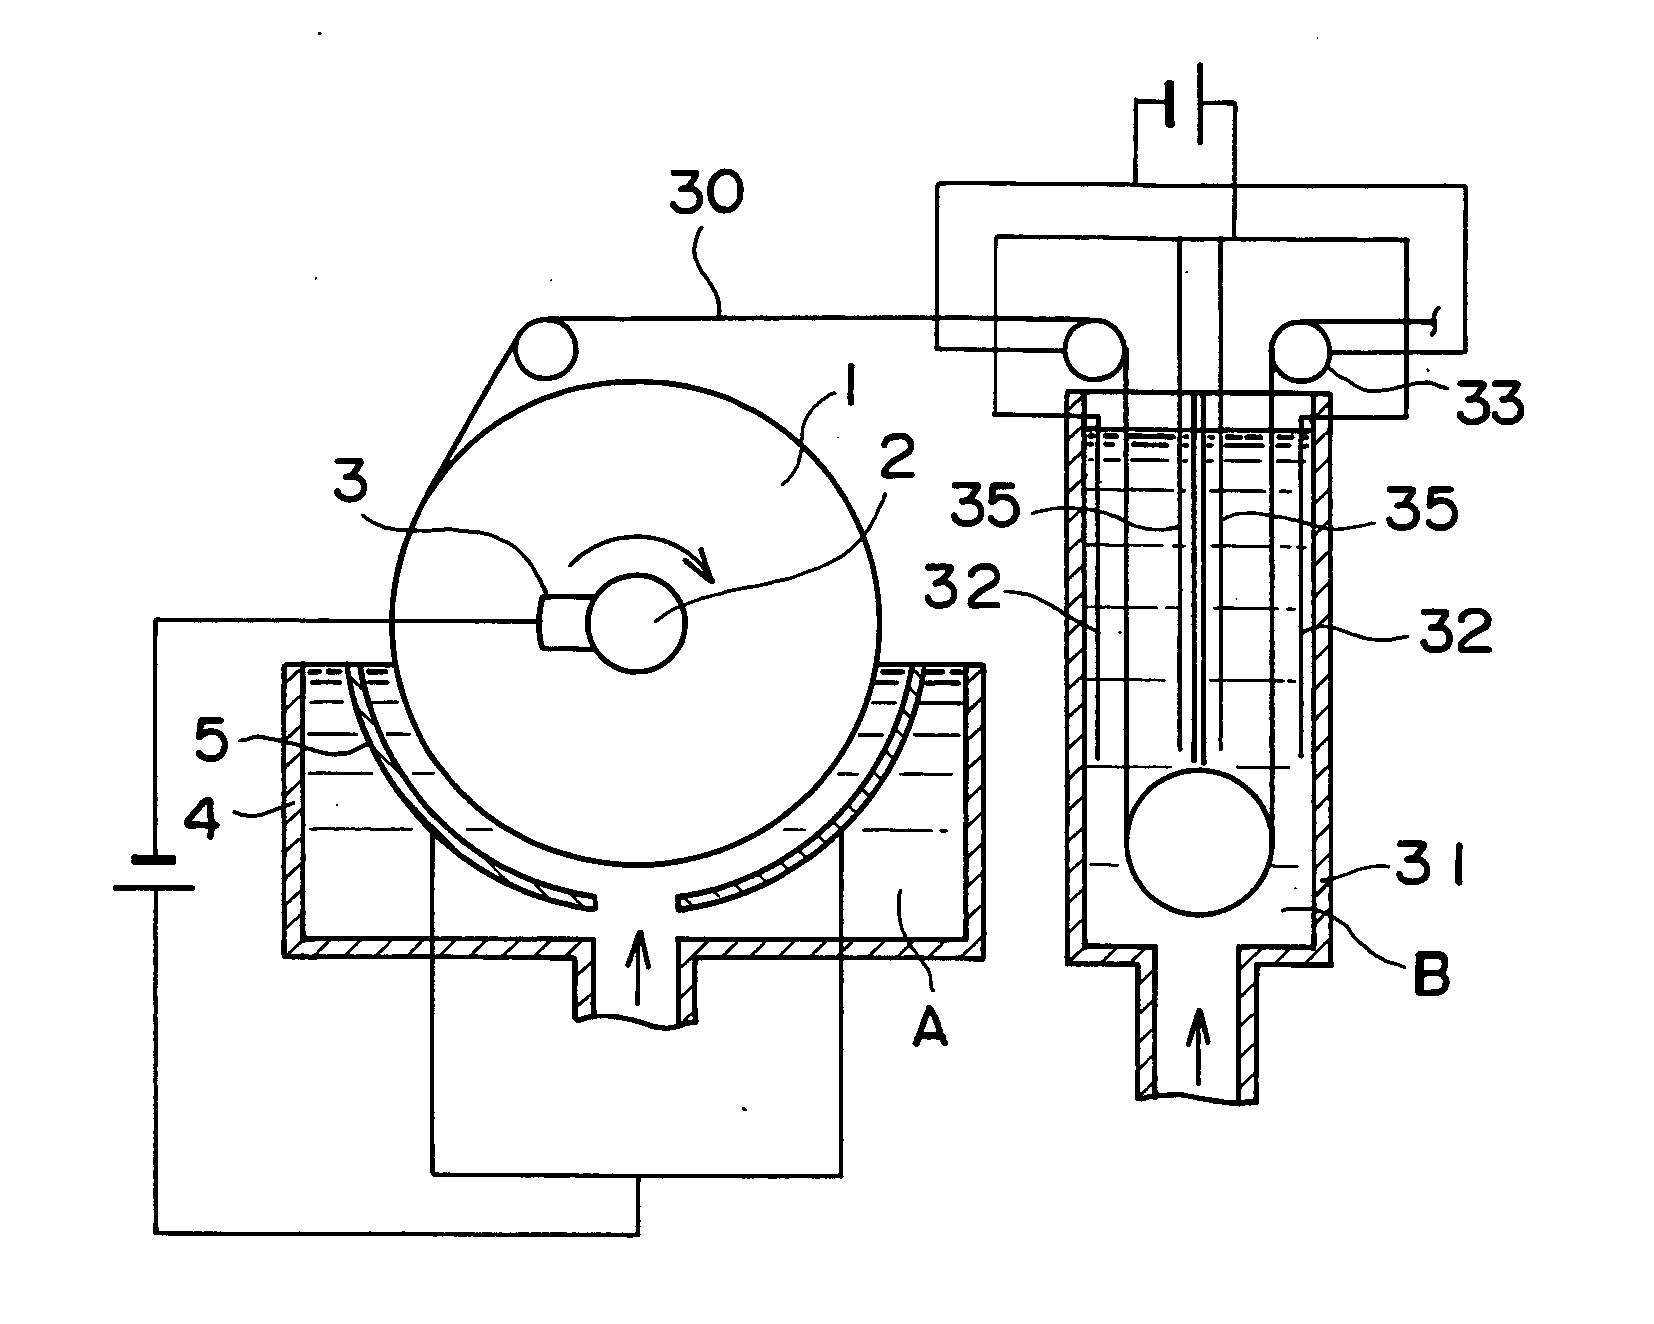 Copper foil for high frequency circuit, method of production and apparatus for production of same, and high frequency circuit using copper foil